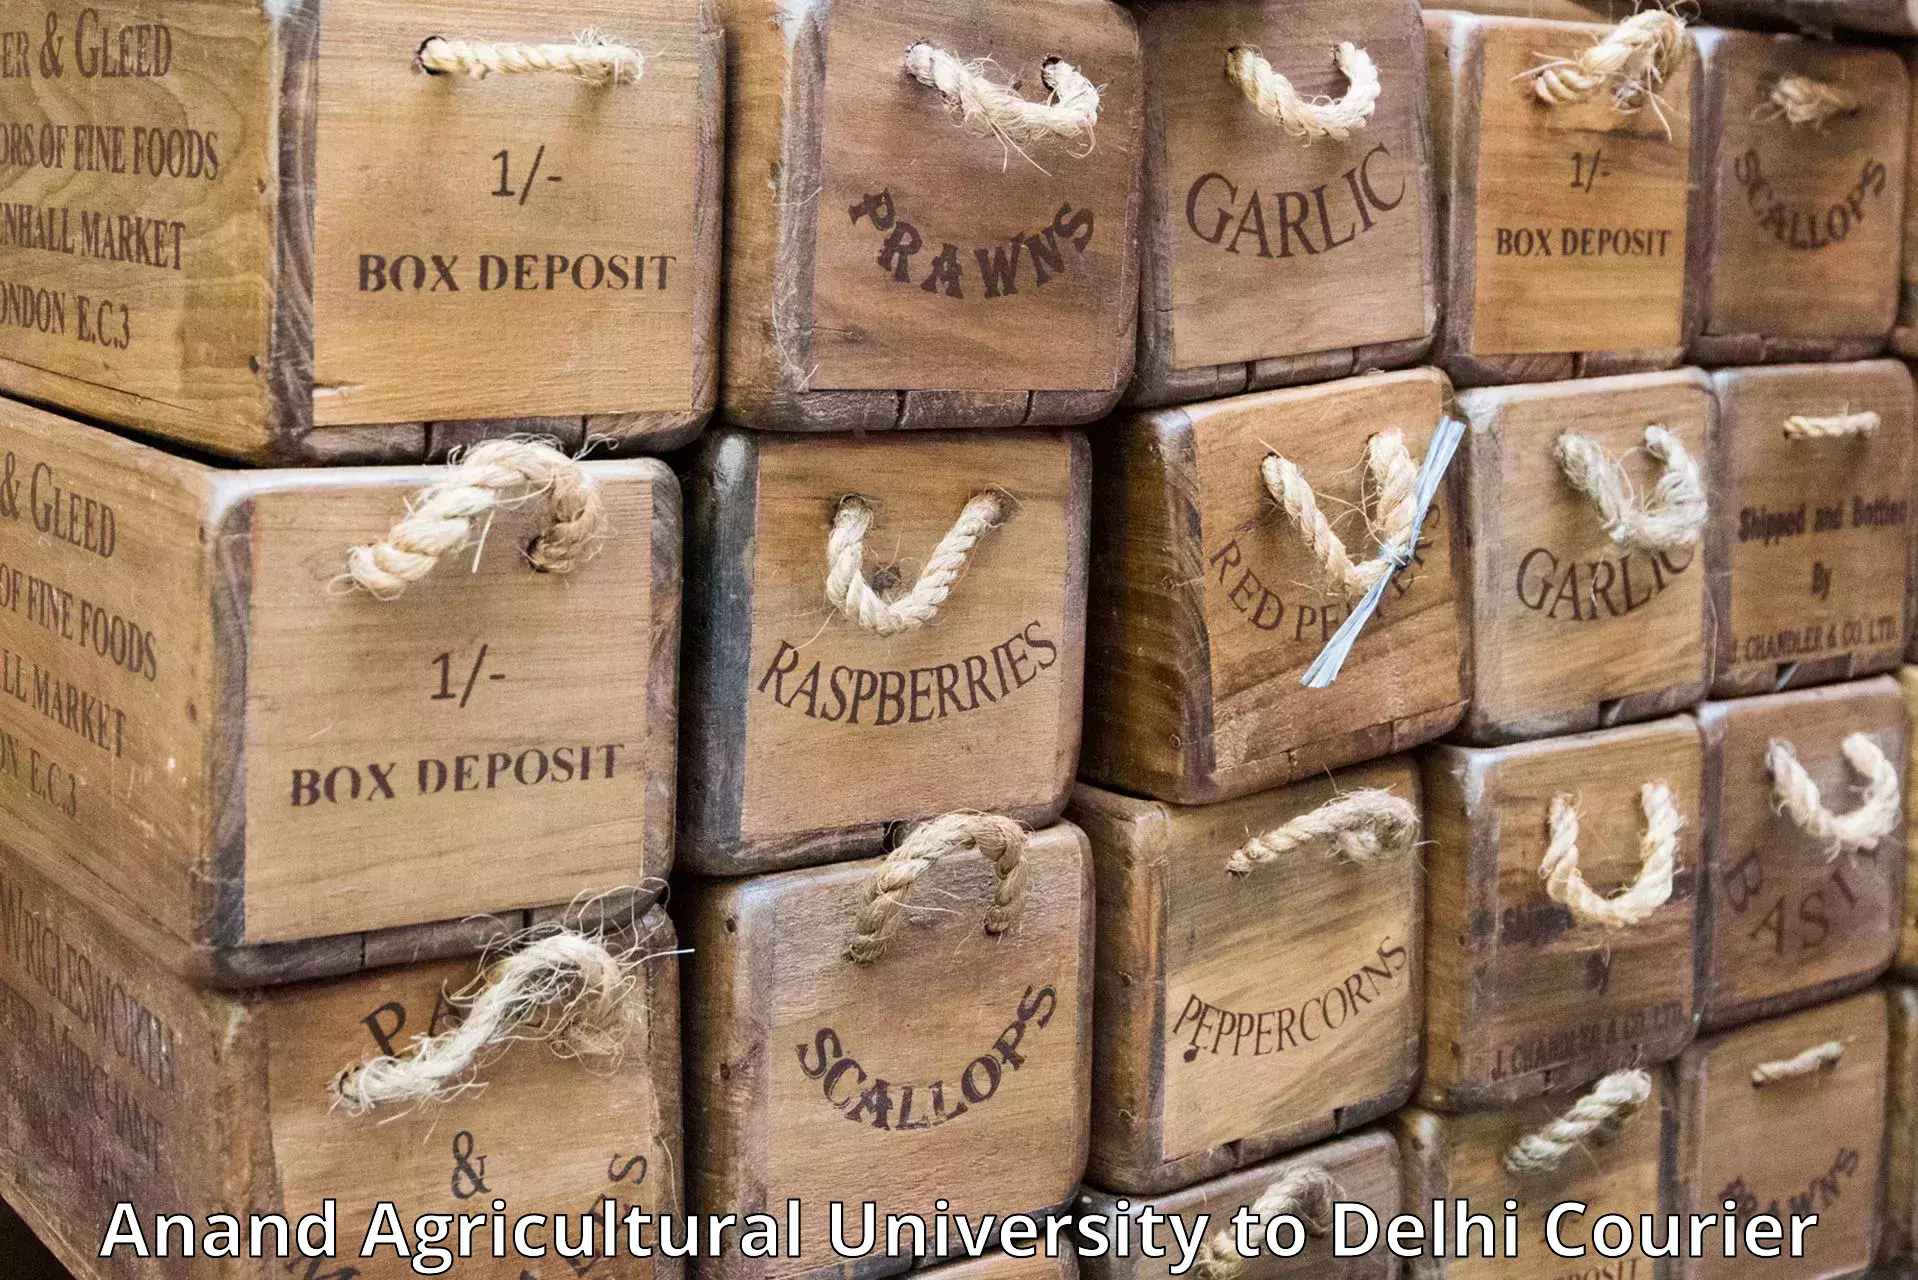 Holiday shipping services Anand Agricultural University to Delhi